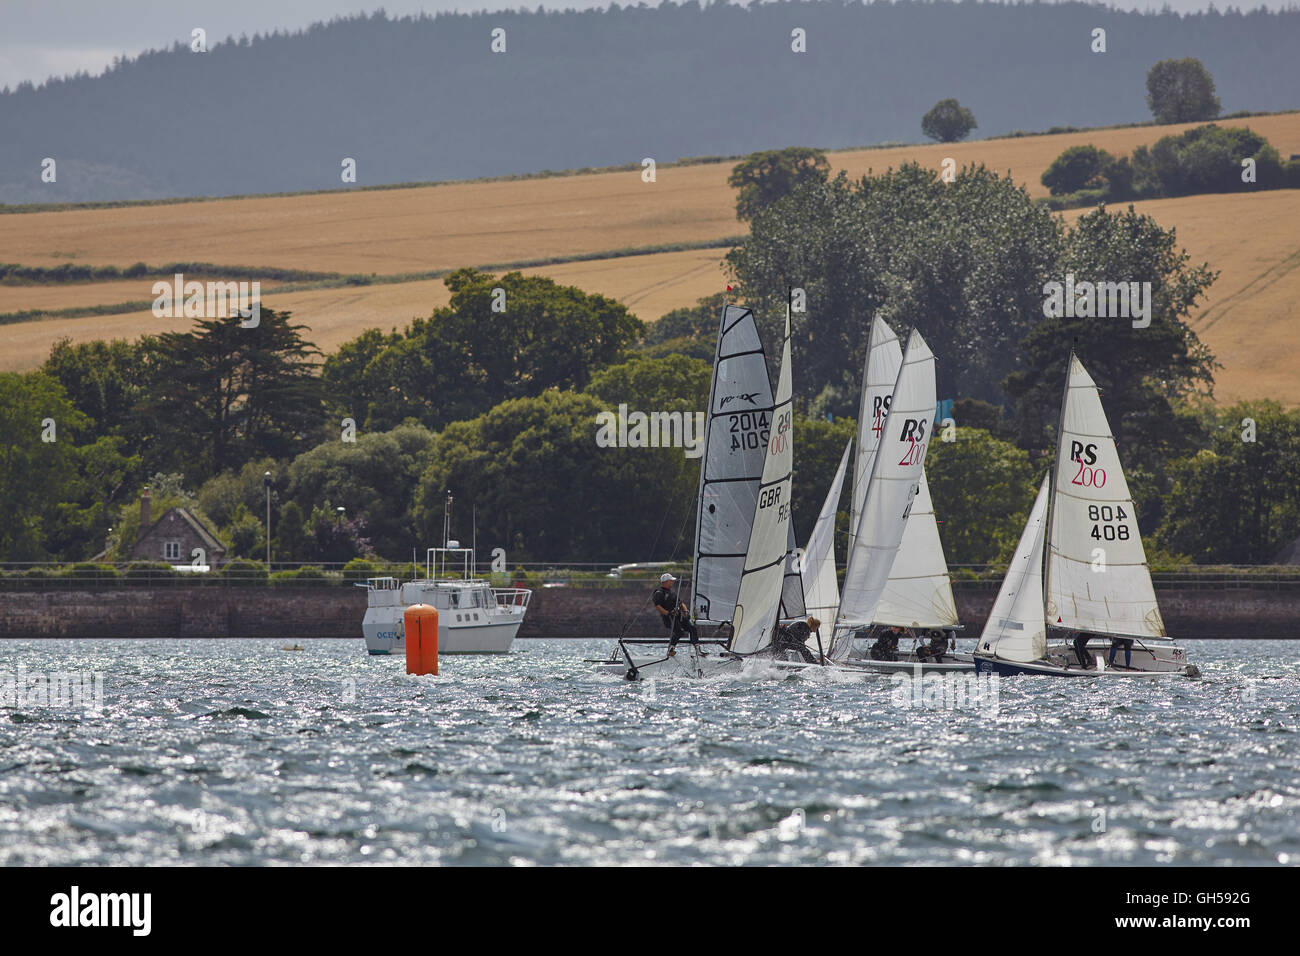 Competitive sailing dinghy racing, in the estuary of the River Exe, south coast of Devon, southwest England, Great Britain. Stock Photo